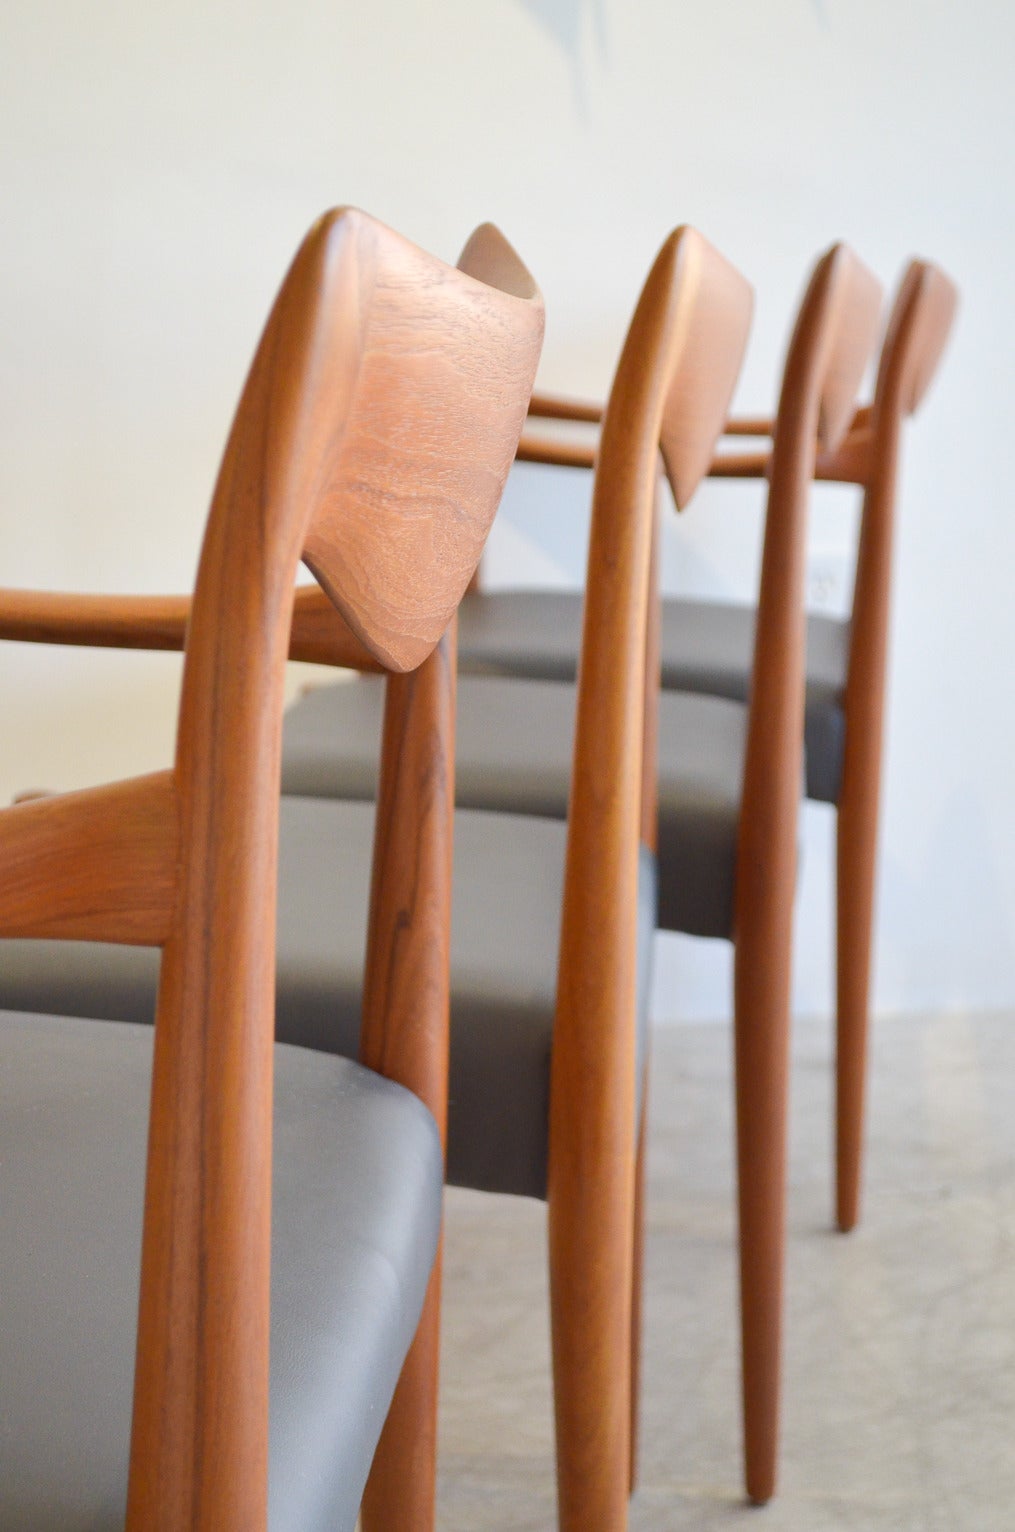 Beautiful set of 4 hand sculpted teak dining chairs by Rolf Rastad and Adolf Relling for Gustav Bahus of Norway.  Set includes two armchairs and two side chairs. Quality craftsmanship with hand sculpted arm and backrests with newly recovered grey